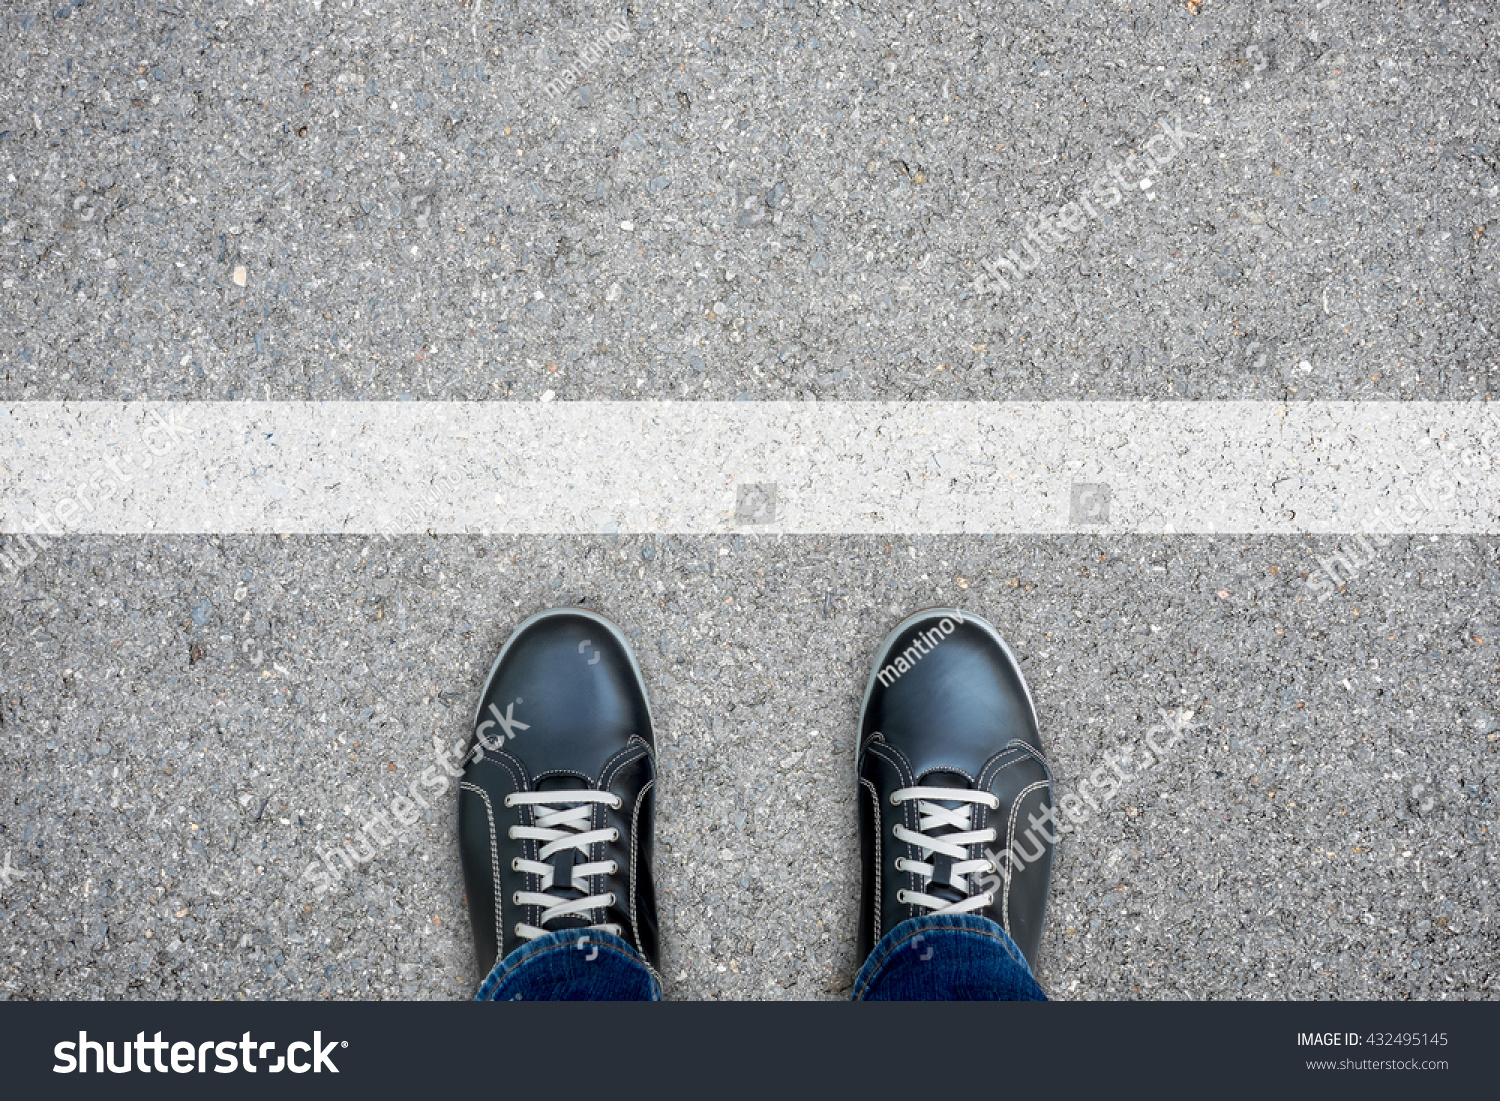 Black casual shoes standing at the white line making decision - stop and turn back or across the line and go further #432495145